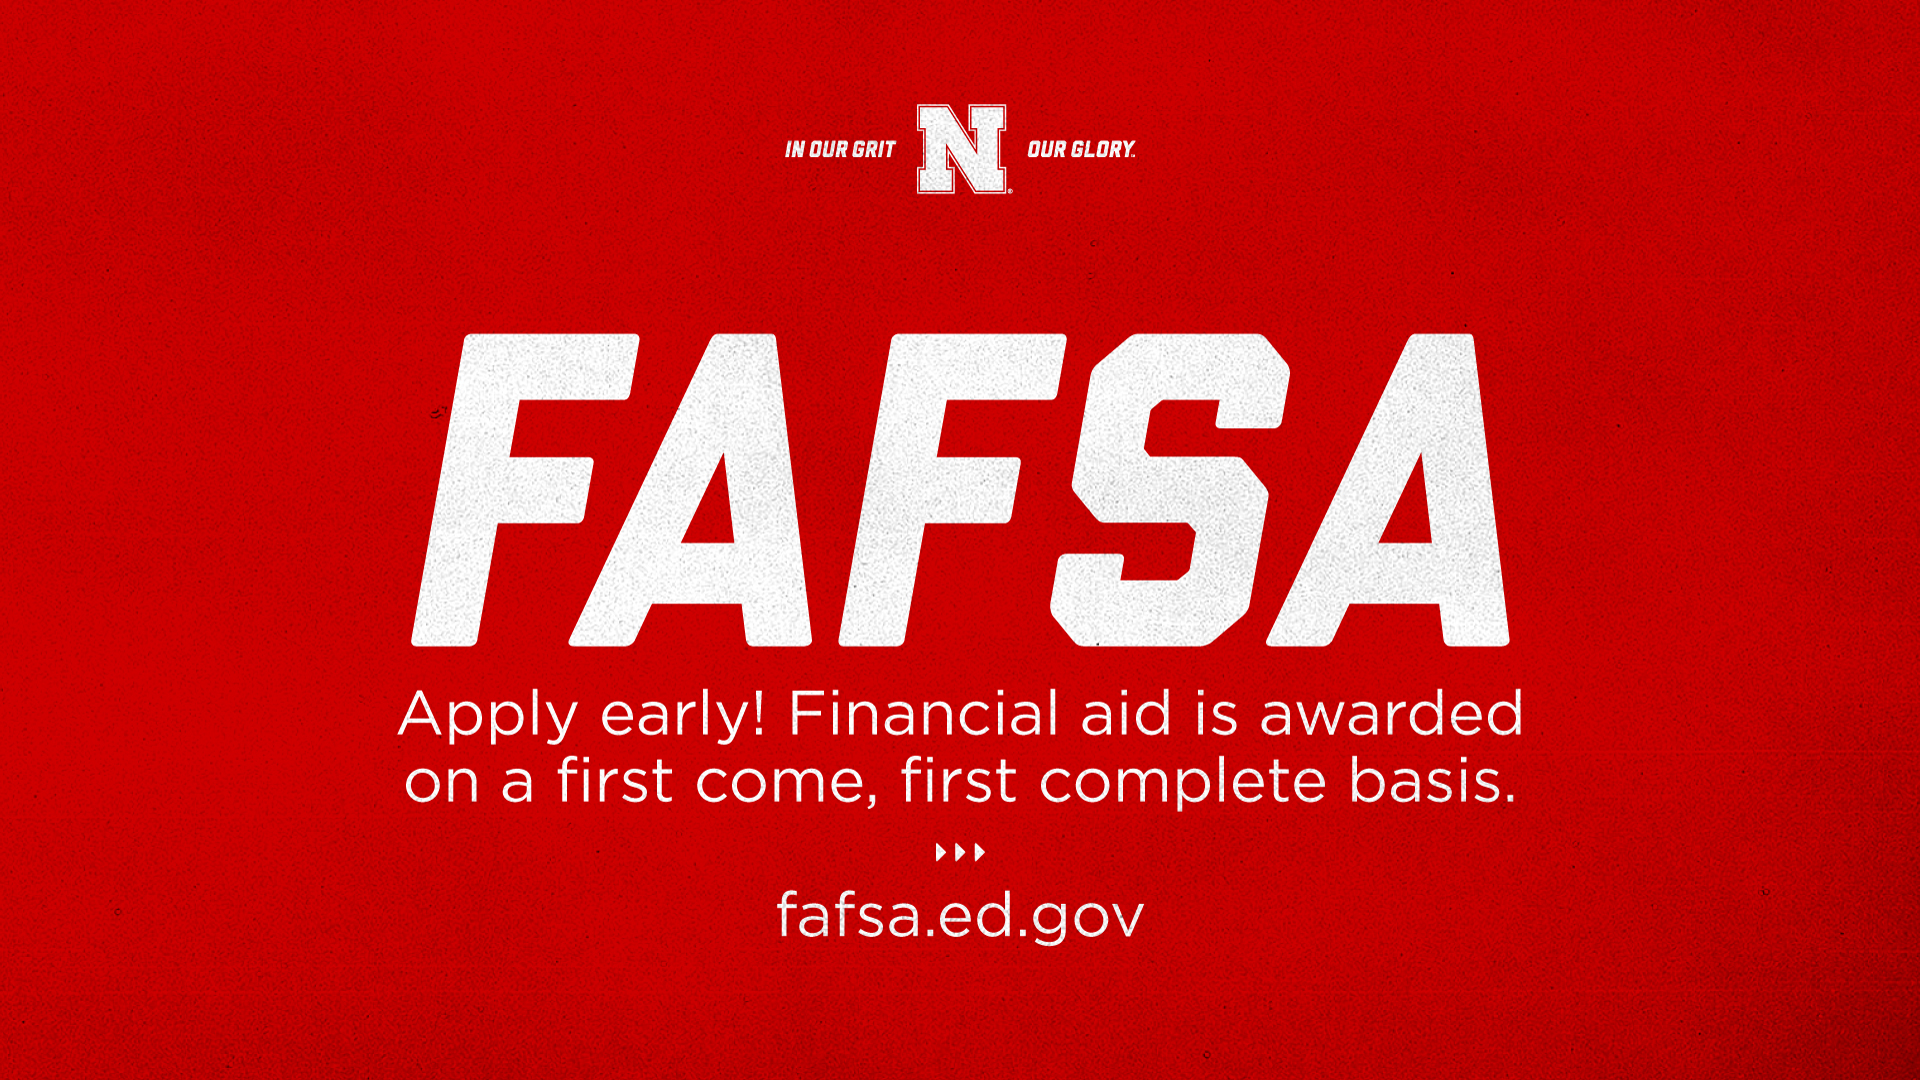 The FAFSA (Free Application for Federal Student Aid) application is available online at fafsa.gov.